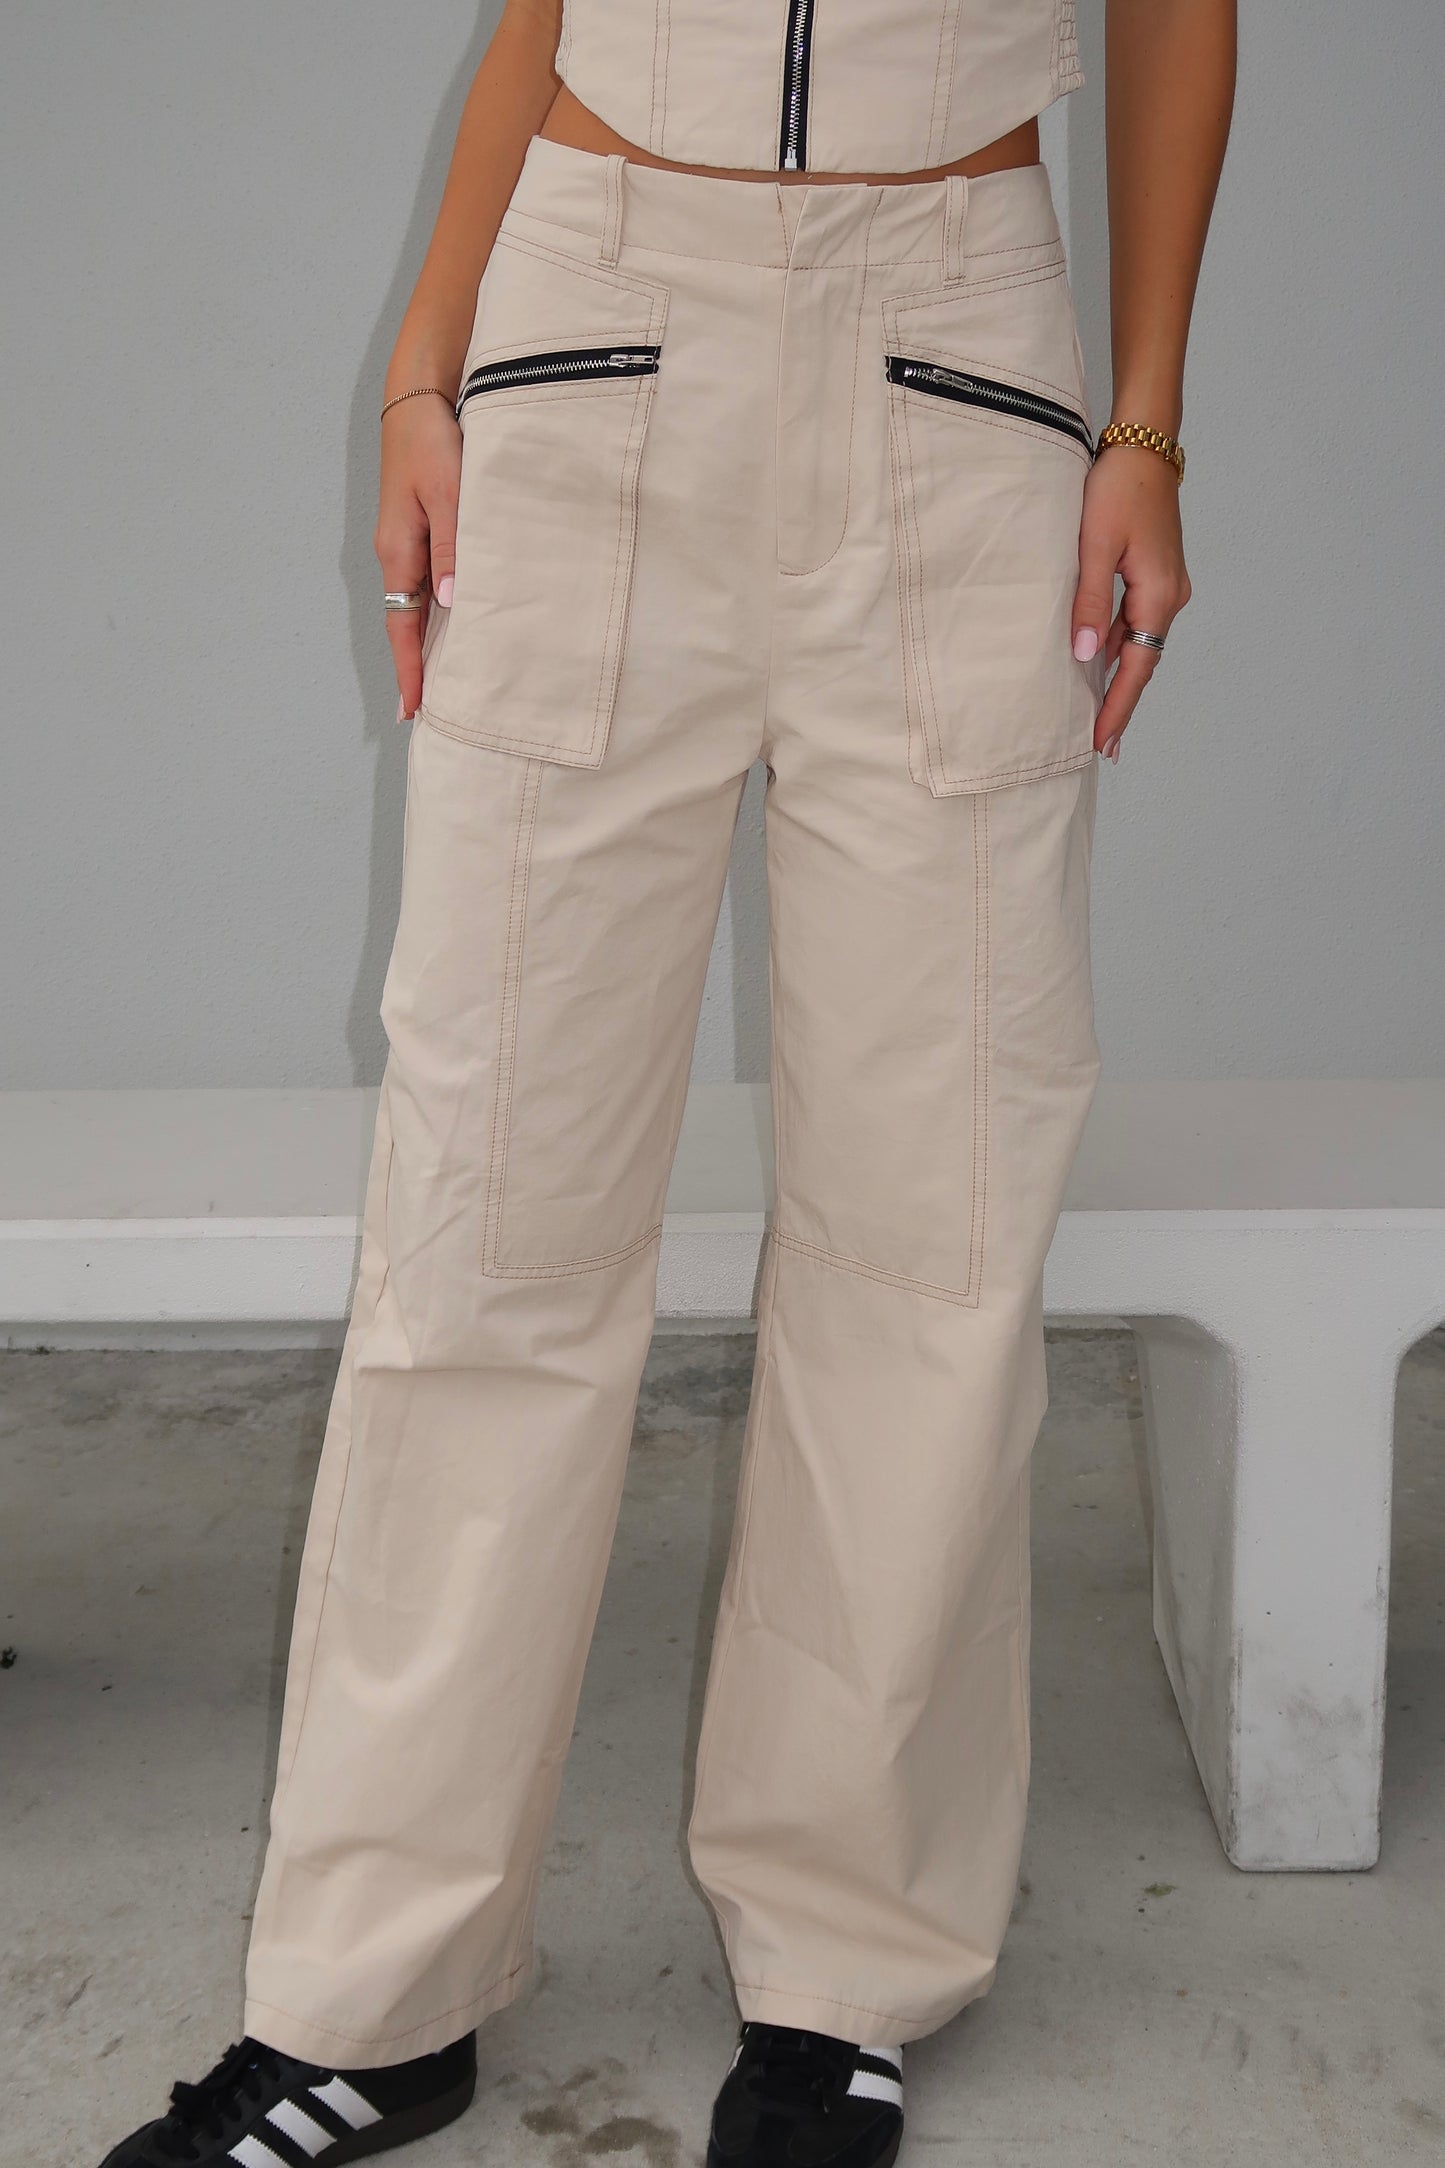 The Industrial Cargo Pants